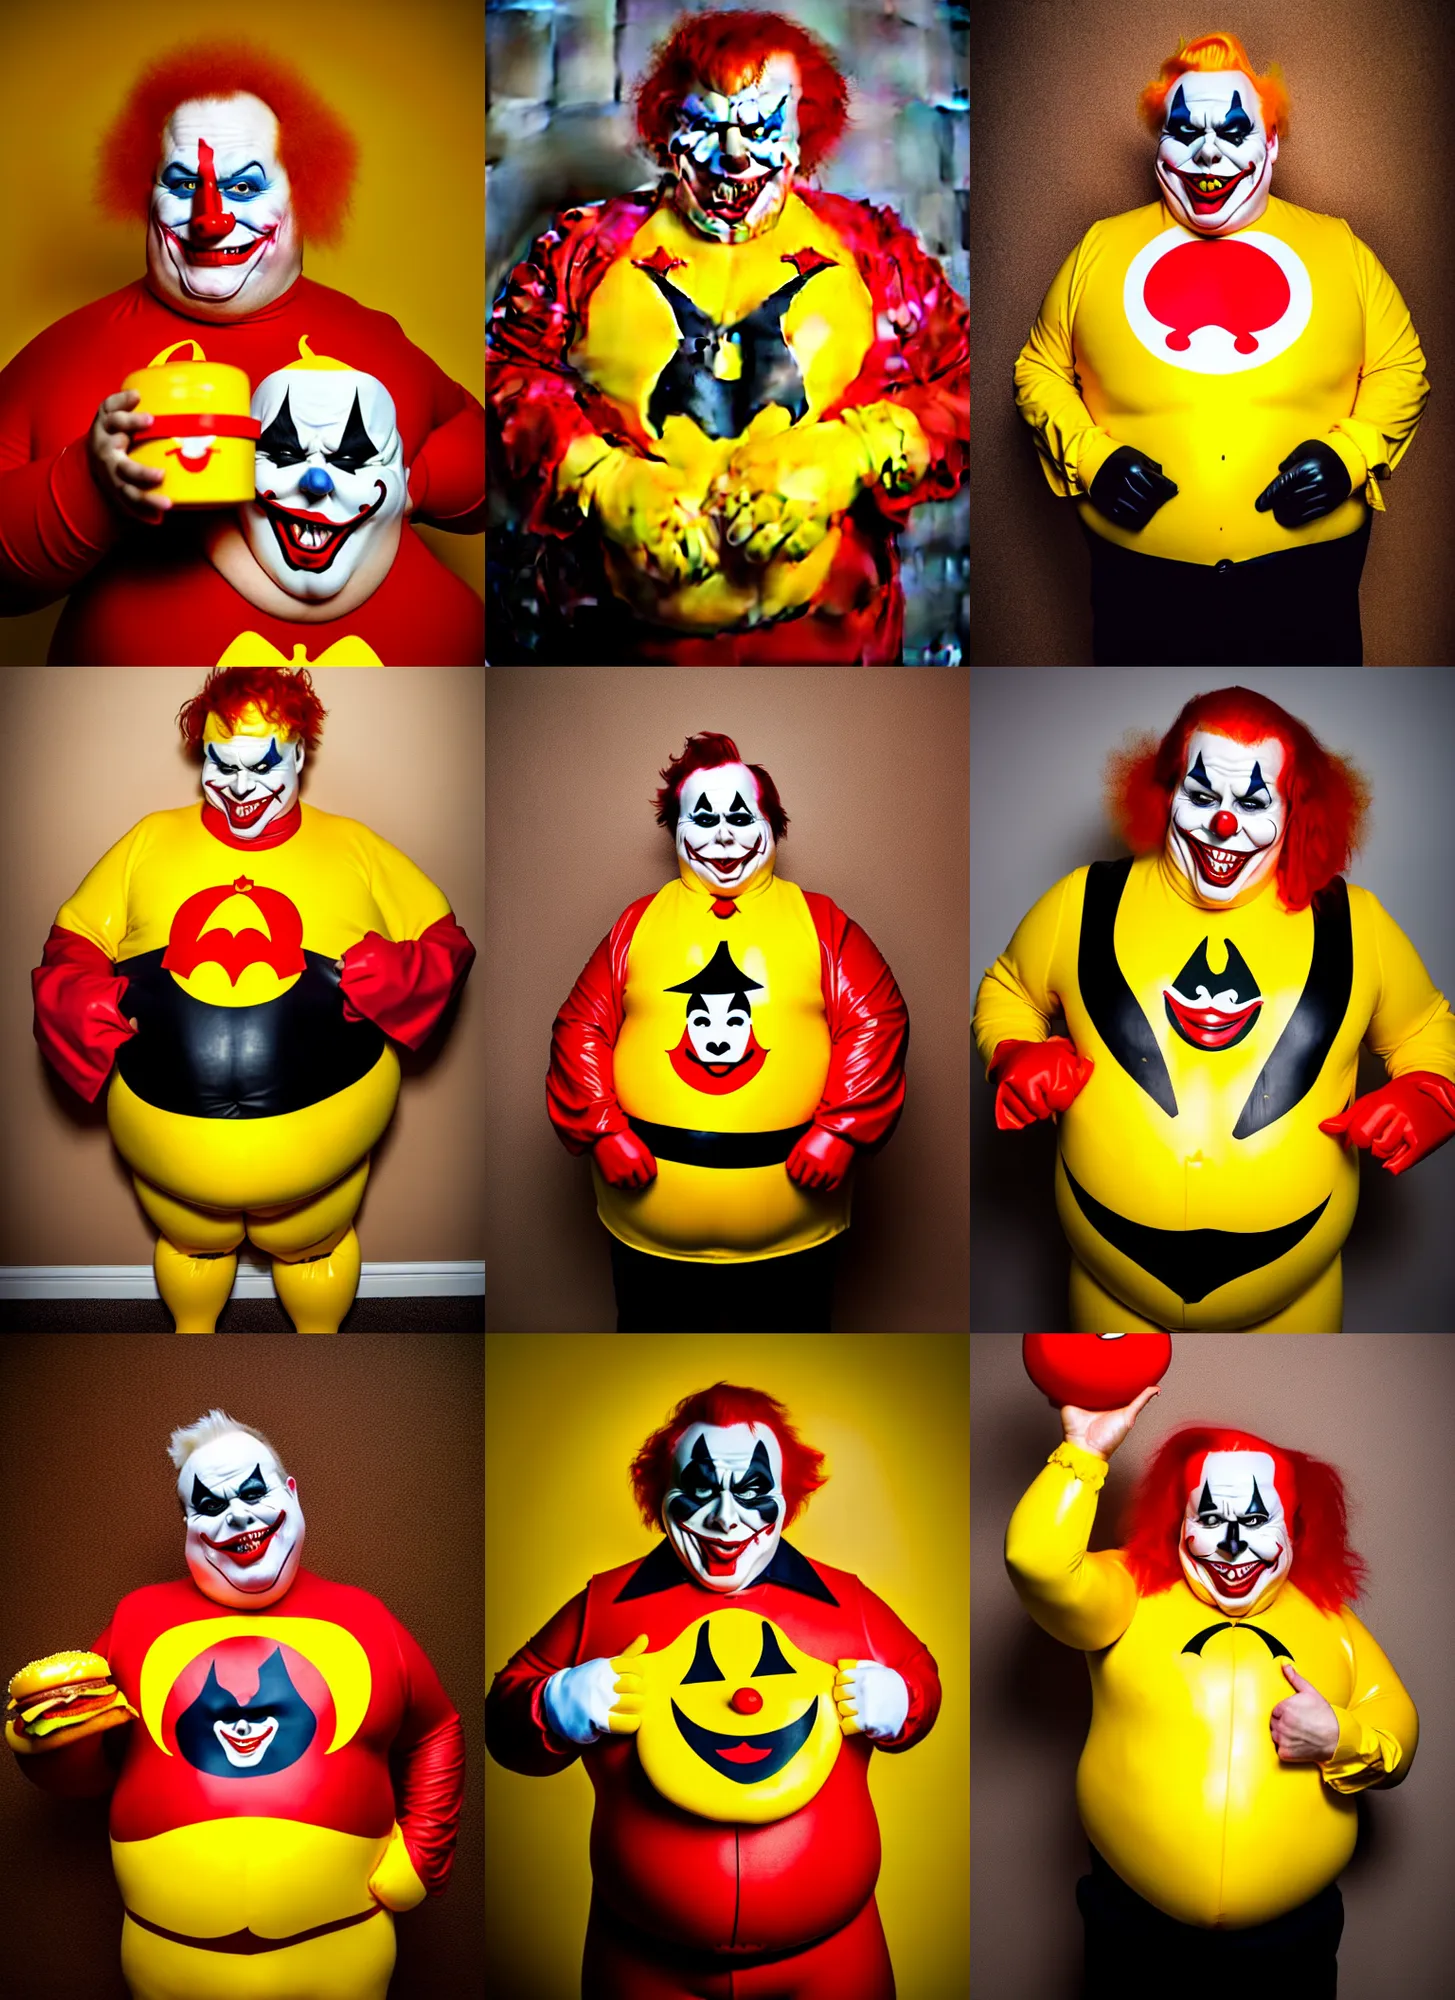 Prompt: wide angle lens portrait of a very chubby sinister looking joker dressed in yellow and red rubber latex Ronald Macdonalds costume holding a sloppy Big Mac, red hair, a Macdonalds logo on his chest, photography inspired by Oleg Vdovenko